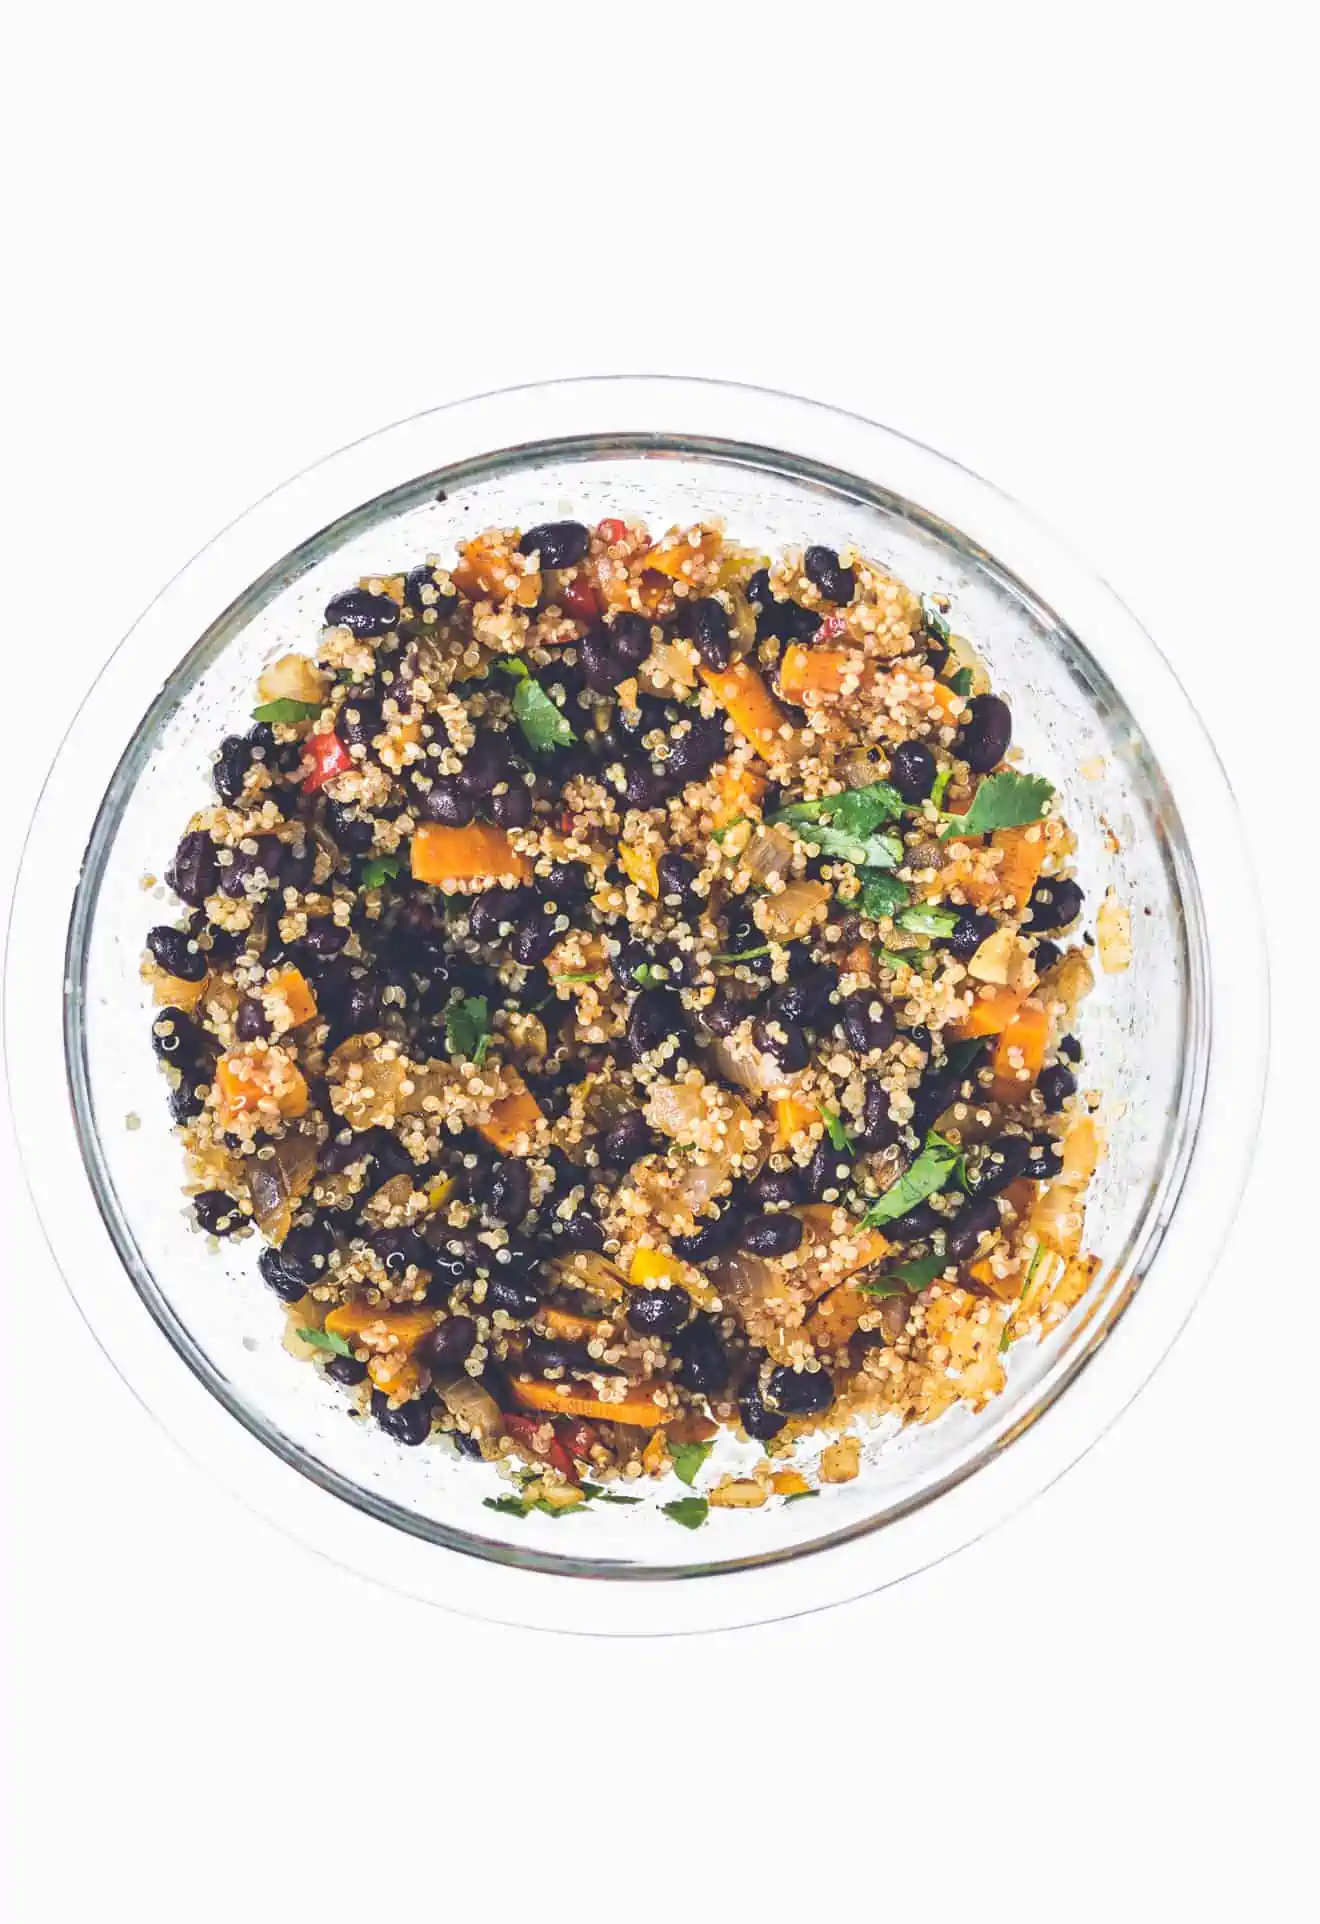 Bowl of mixed vegetables with quinoa and black beans